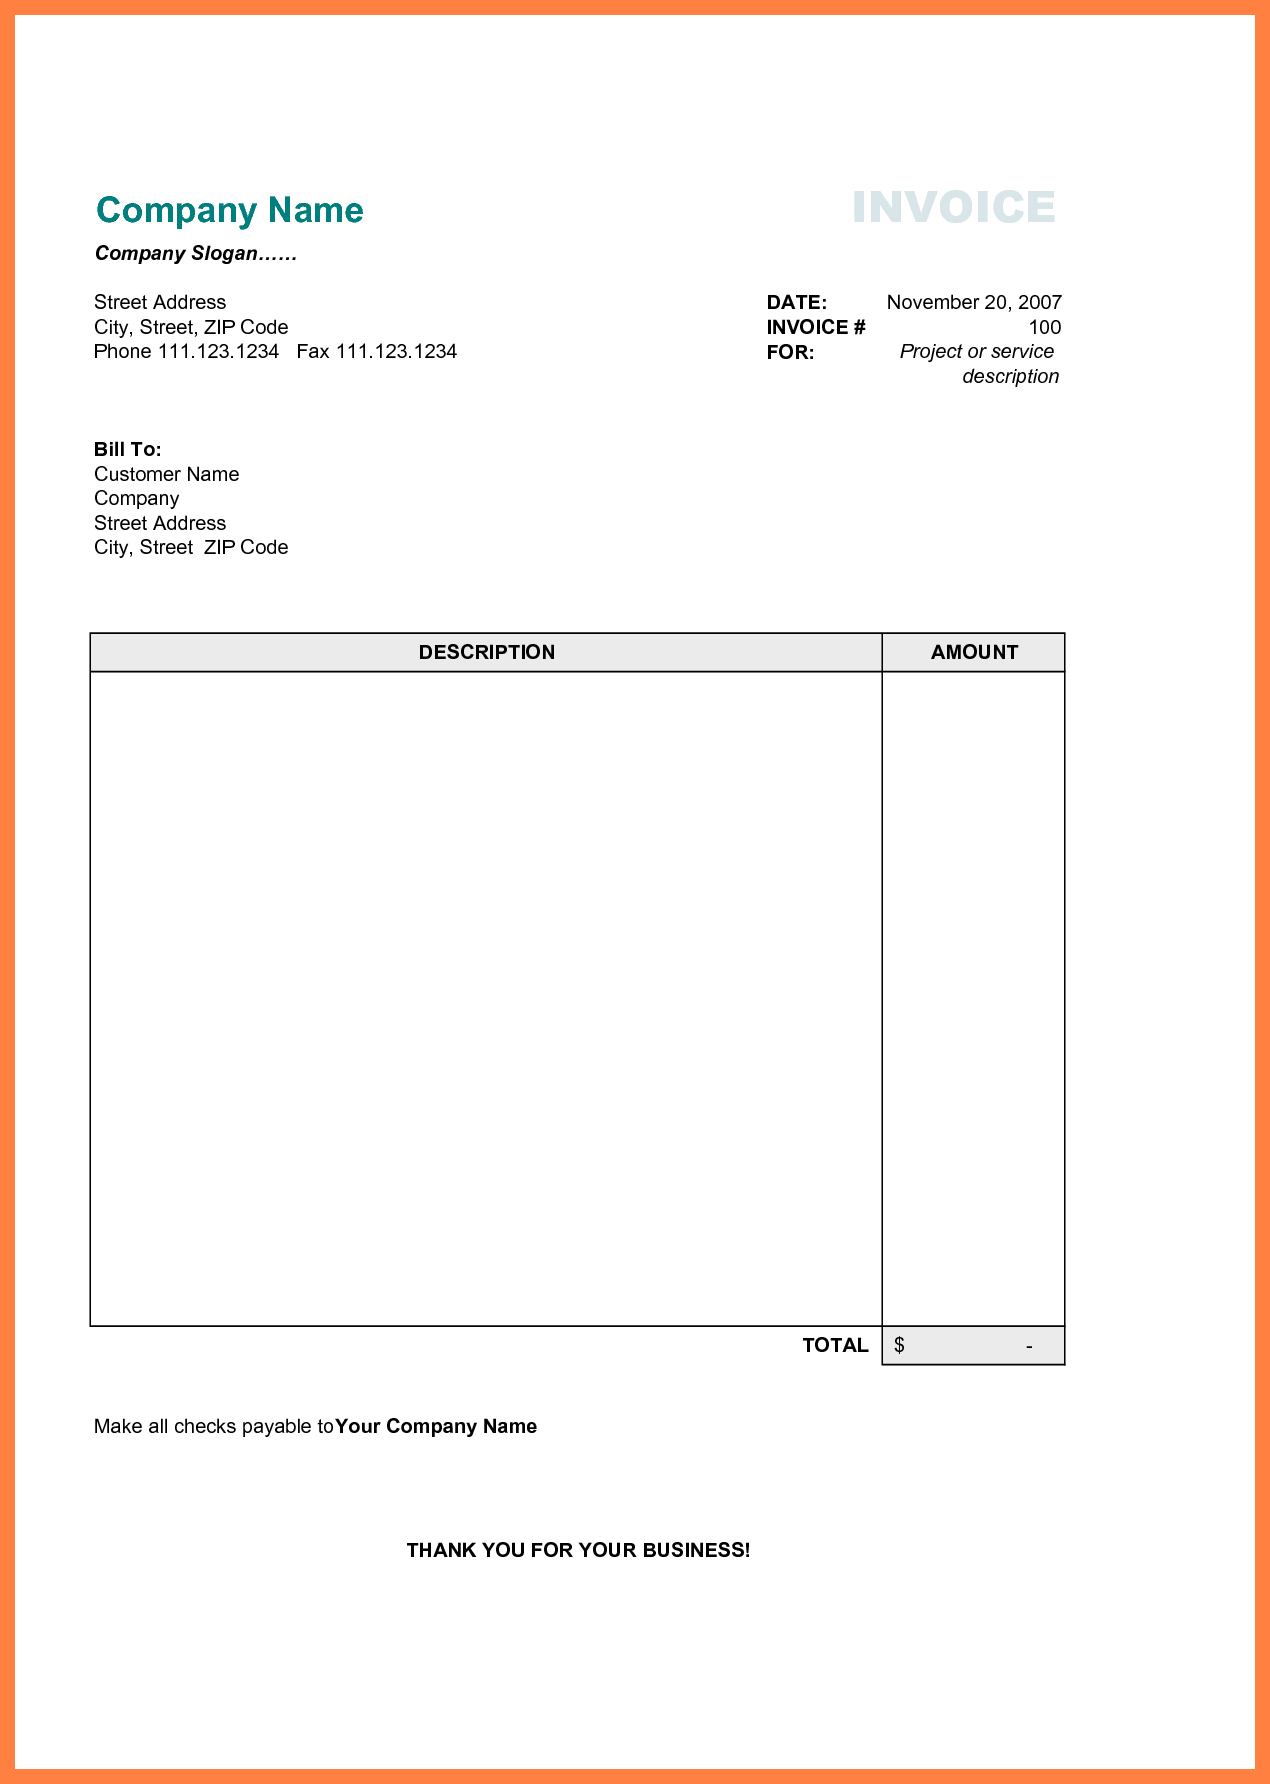 Free Printable Business Invoice Template - Invoice Format In Excel - Free Printable Catering Invoice Template